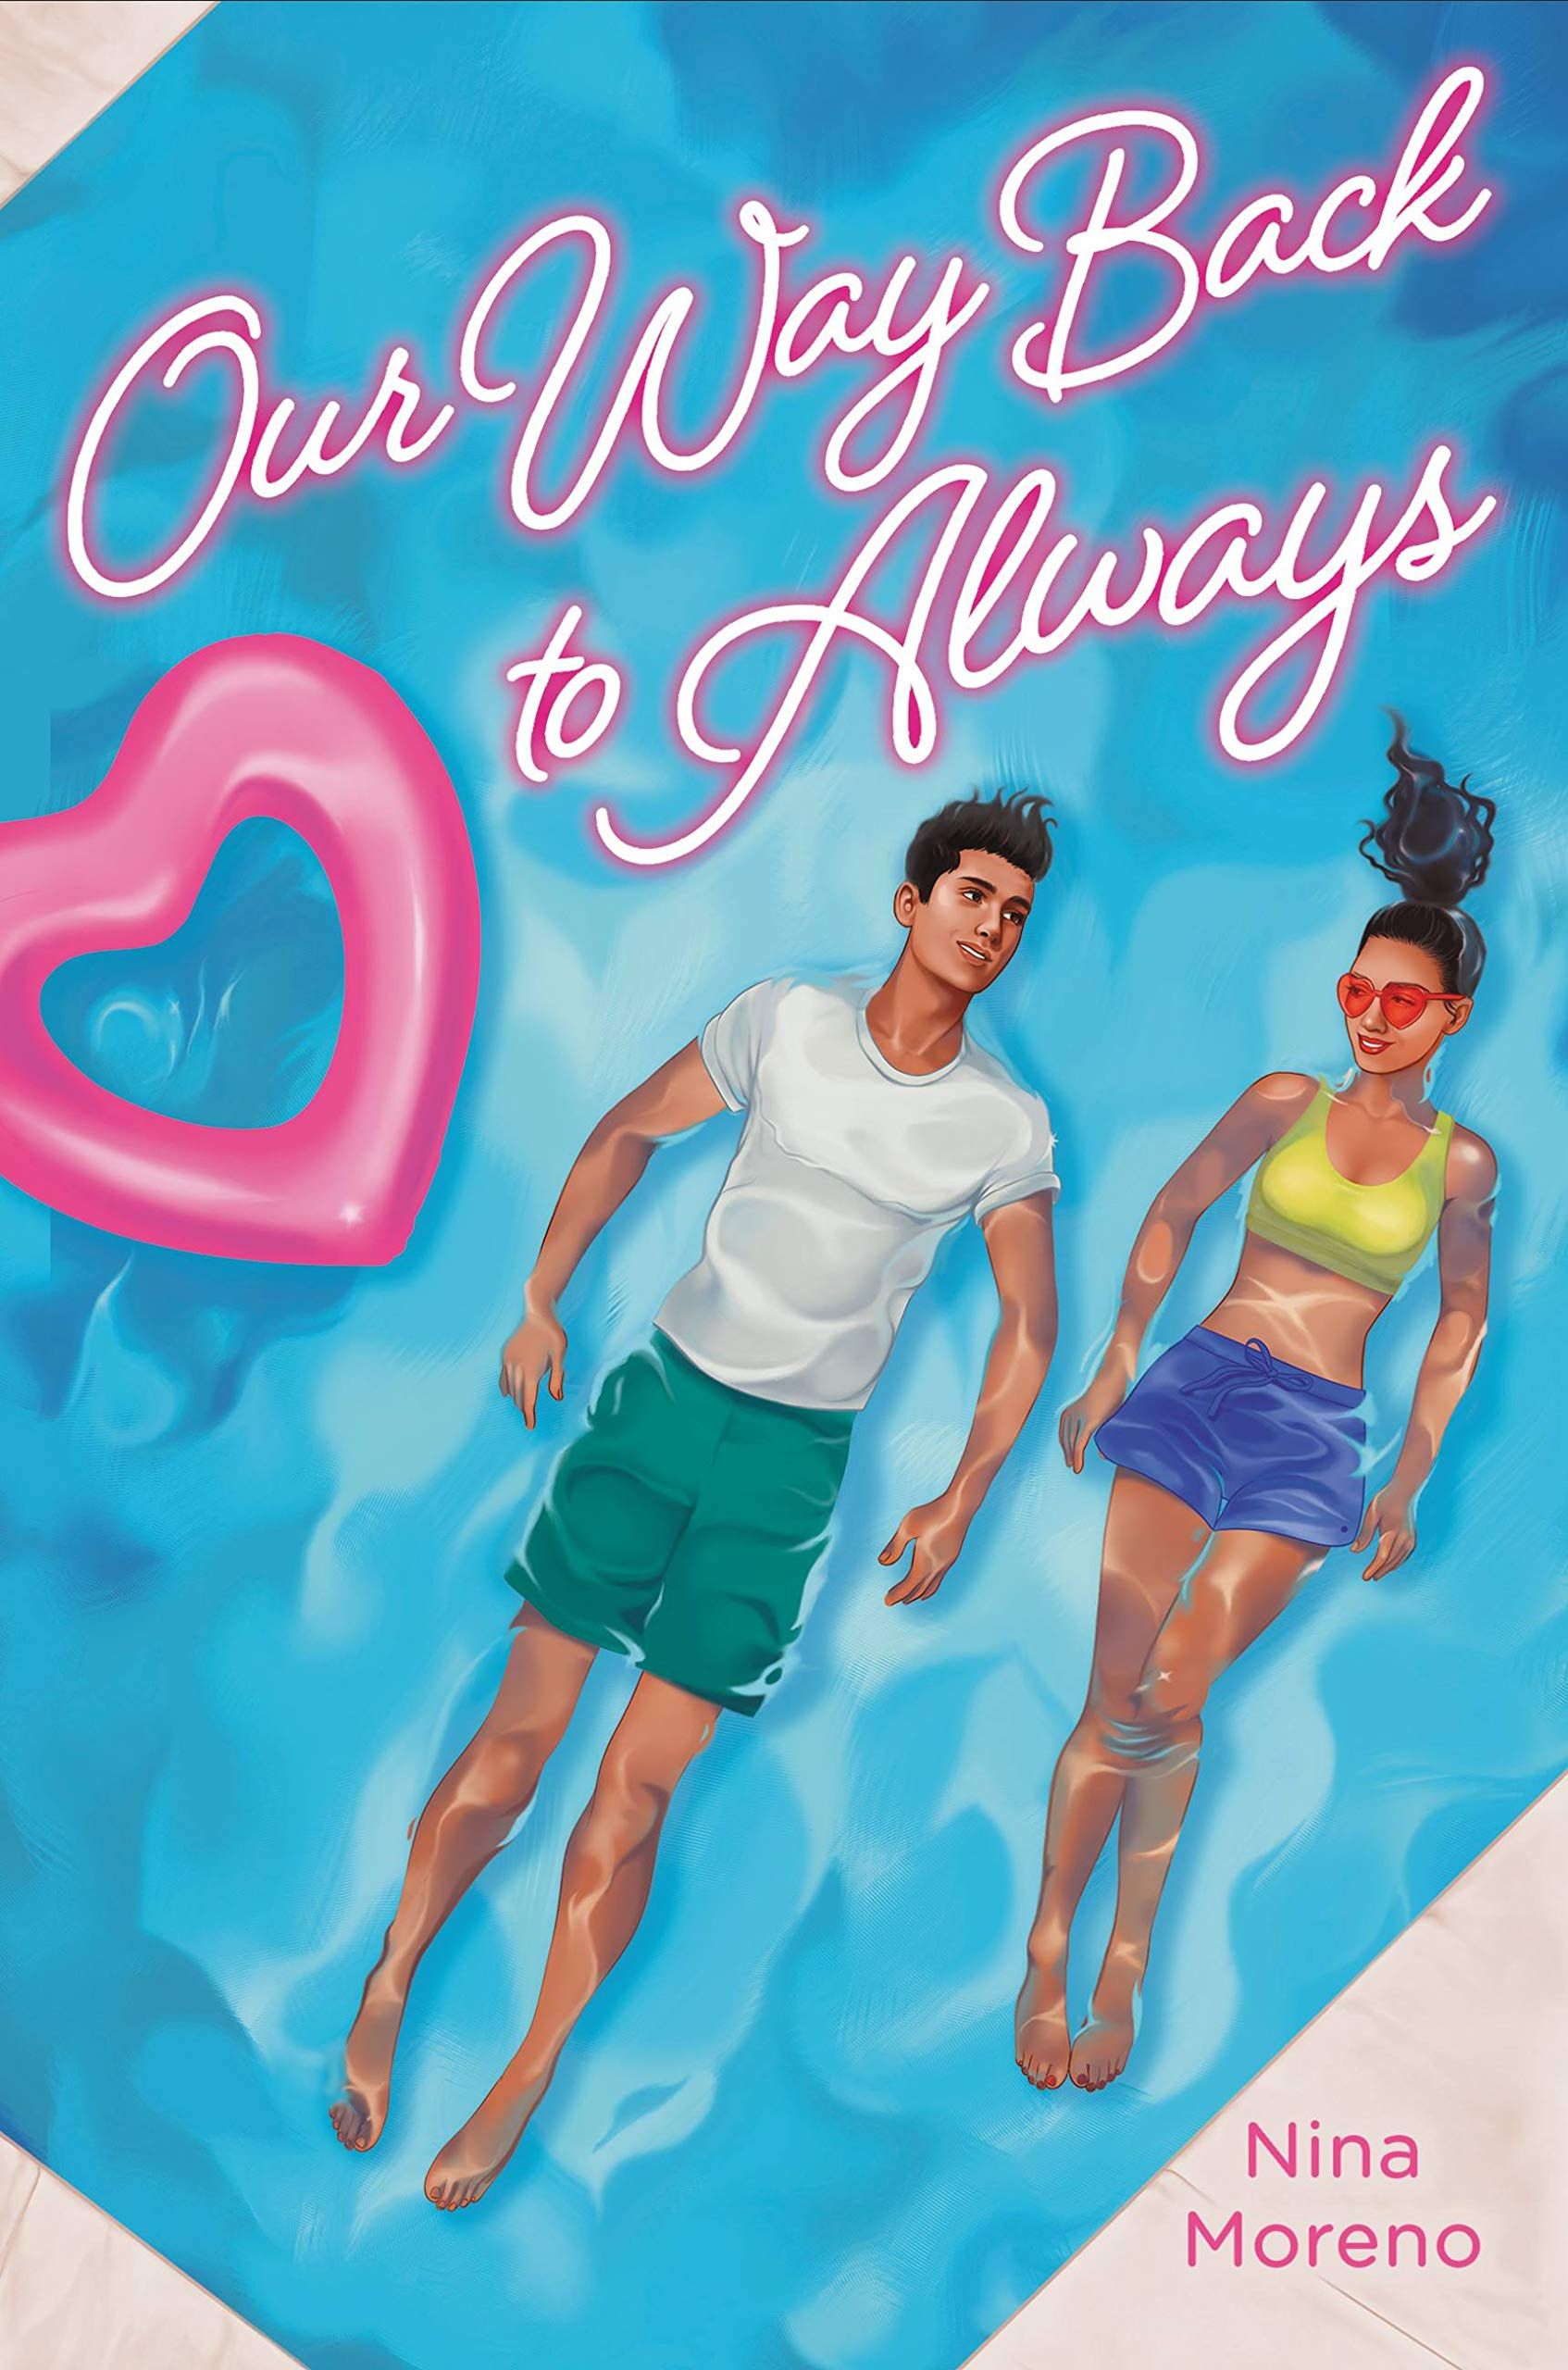 Our Way Back to Always by Nina Moreno book cover